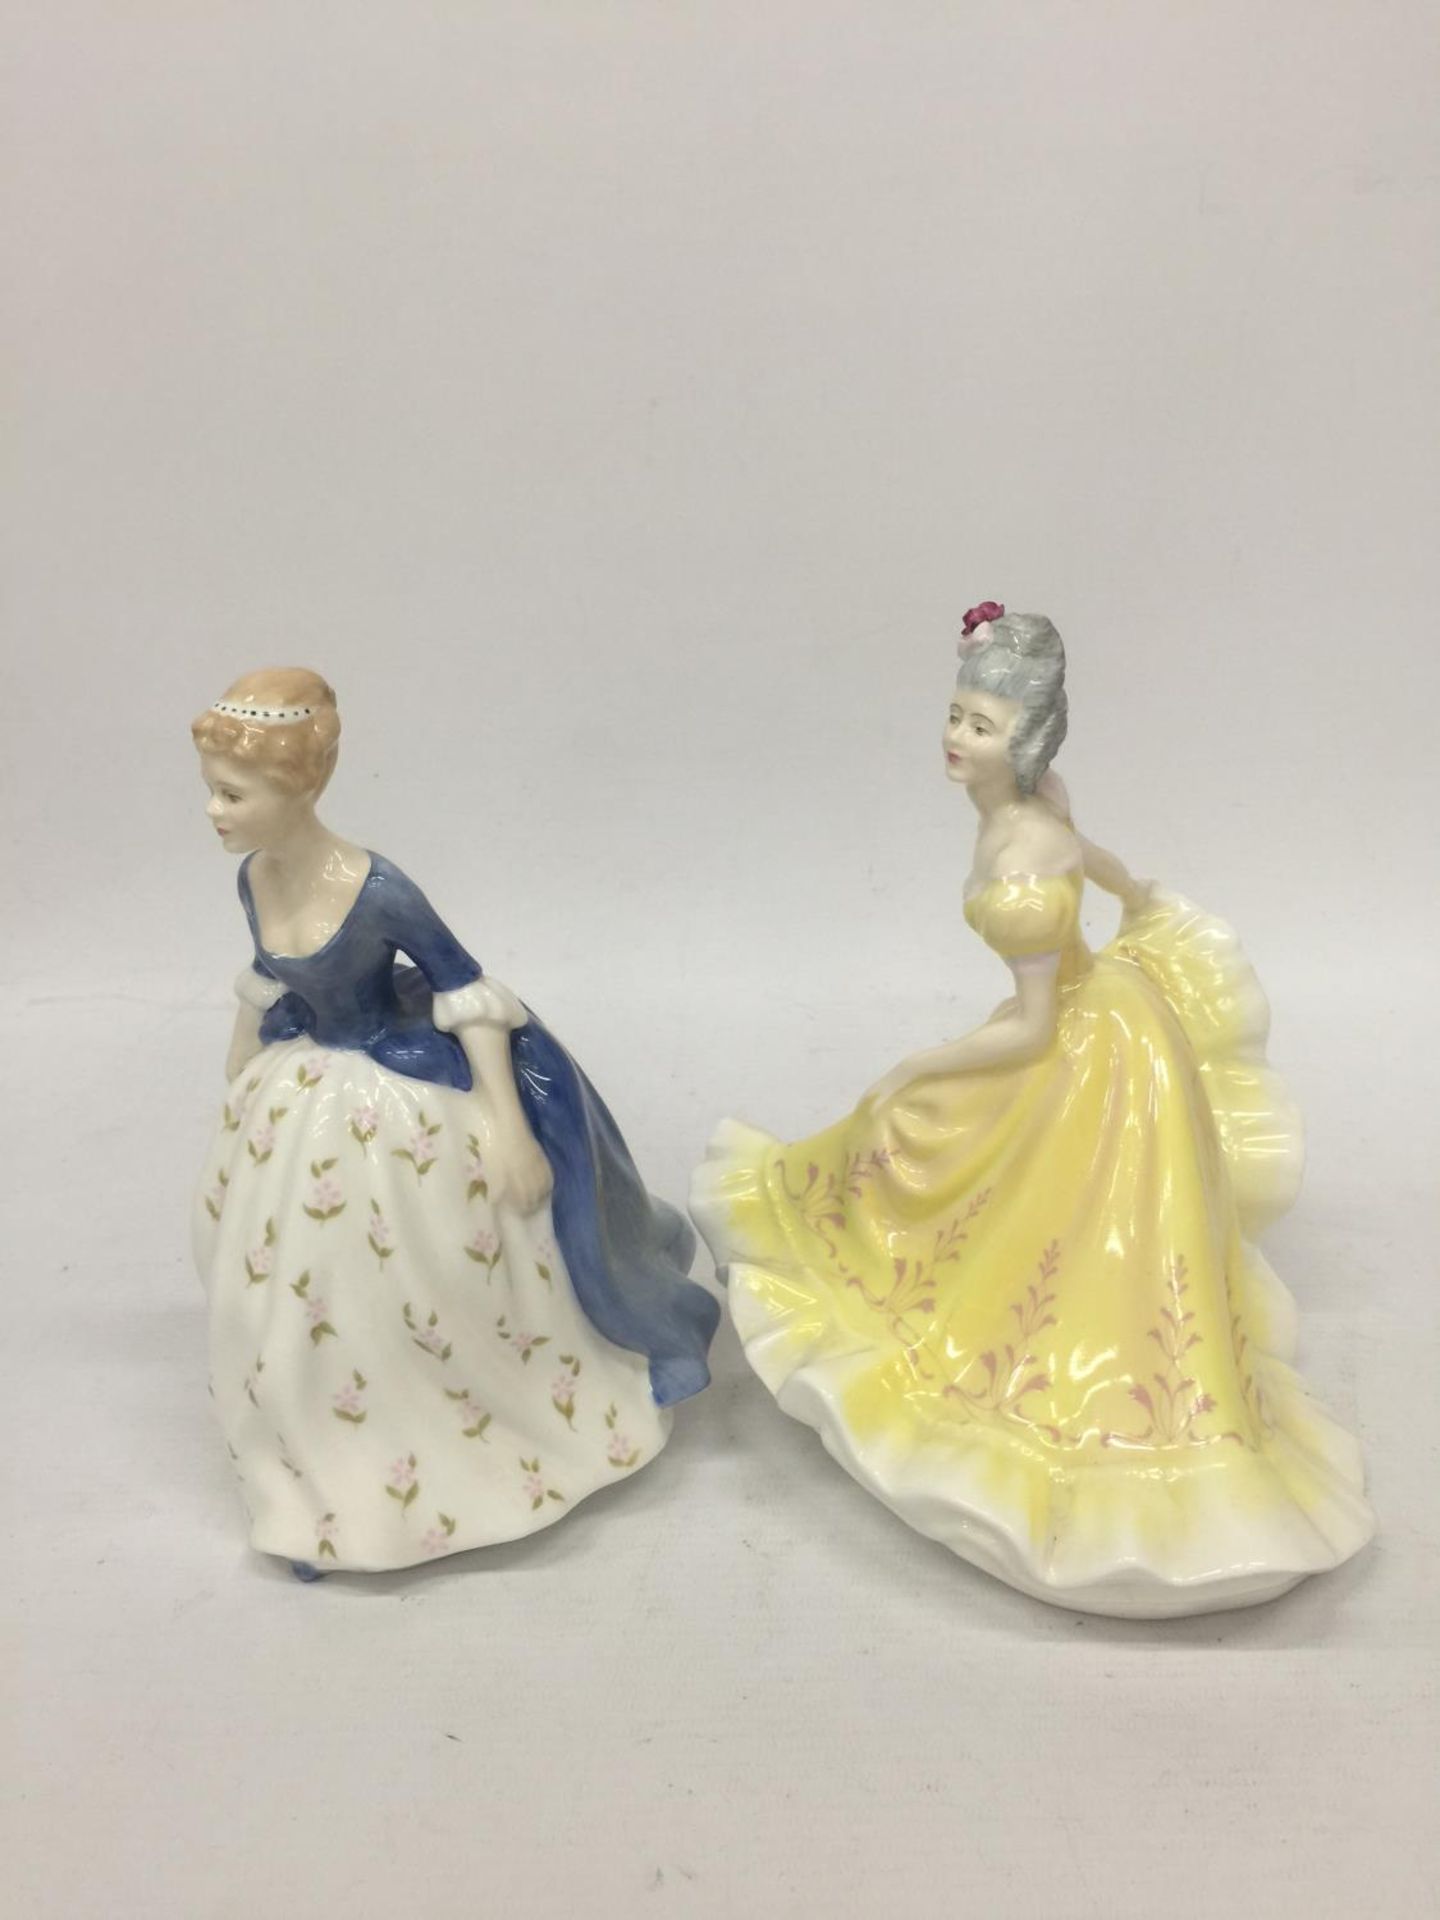 TWO ROYAL DOULTON FIGURINES "ALISON" HN 2336 (19 CM) AND NINETTE HN 2379 A/F (21 CM) - Image 4 of 5